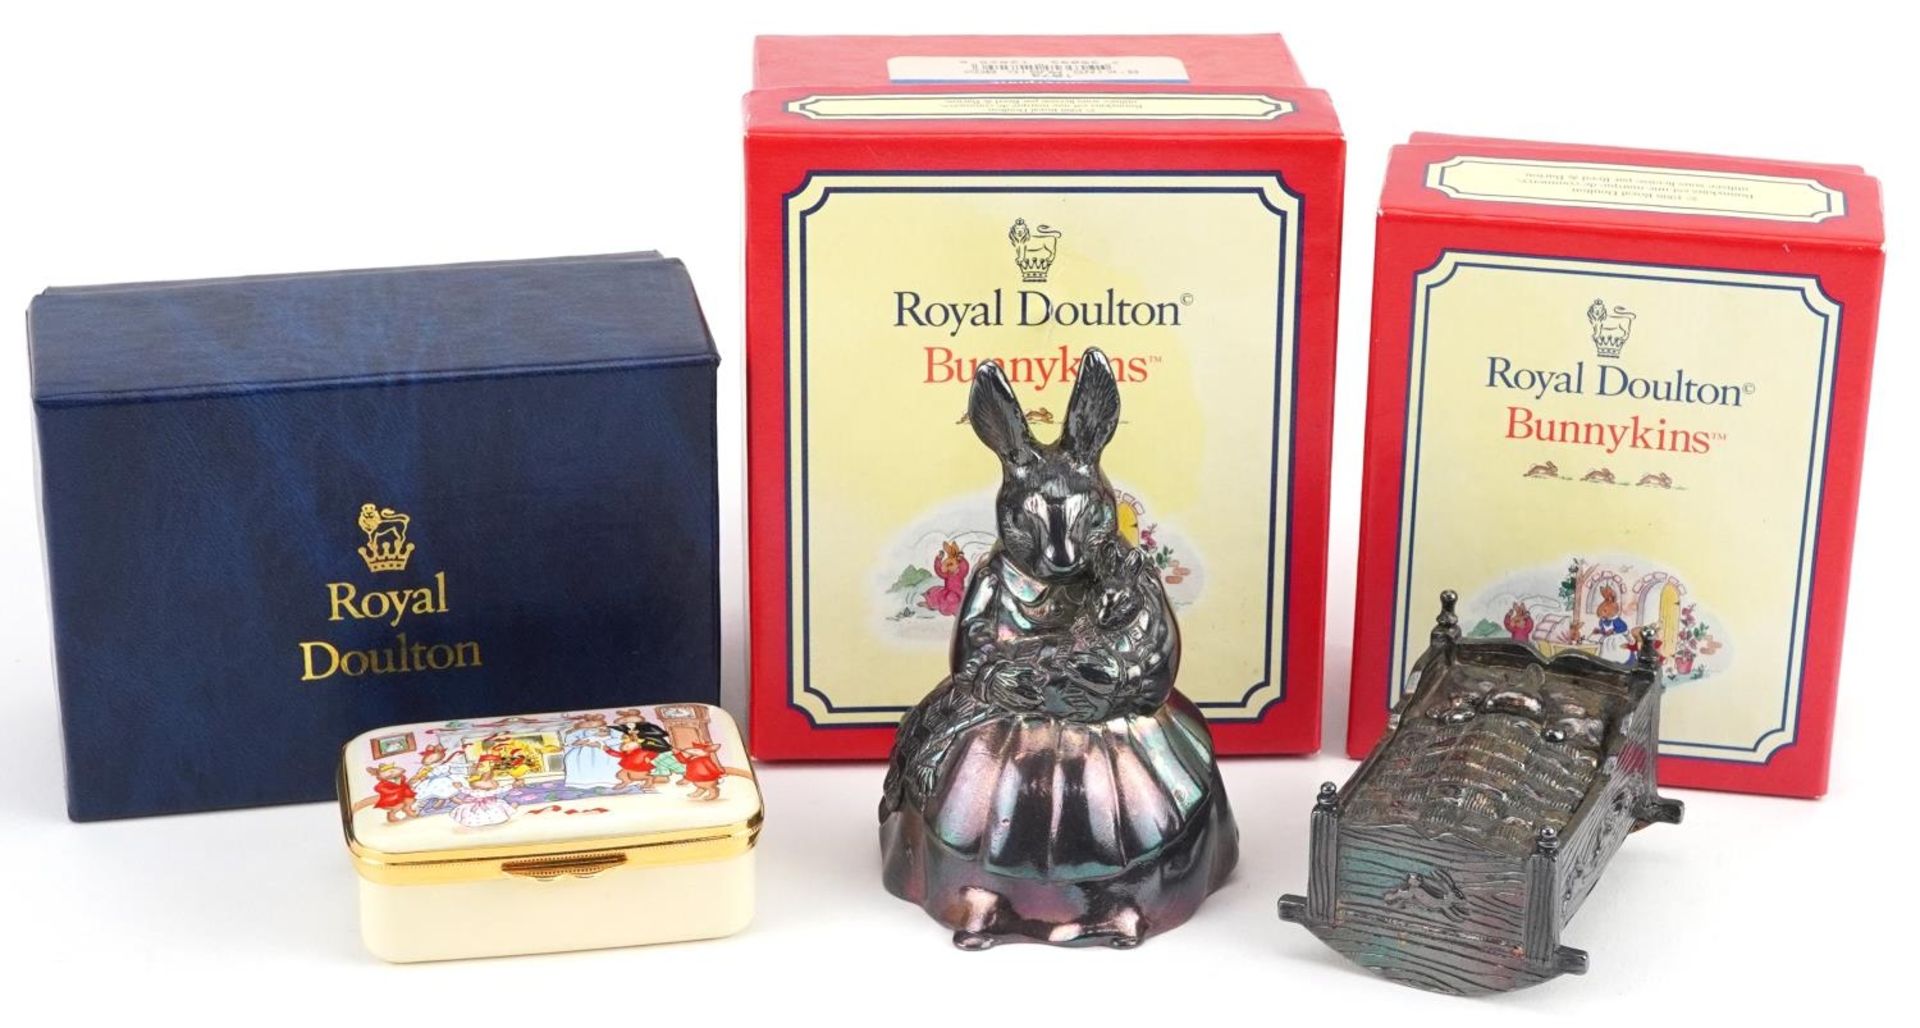 Two Royal Doulton Bunnykins musical boxes and a Royal Doulton enamelled box commemorating the